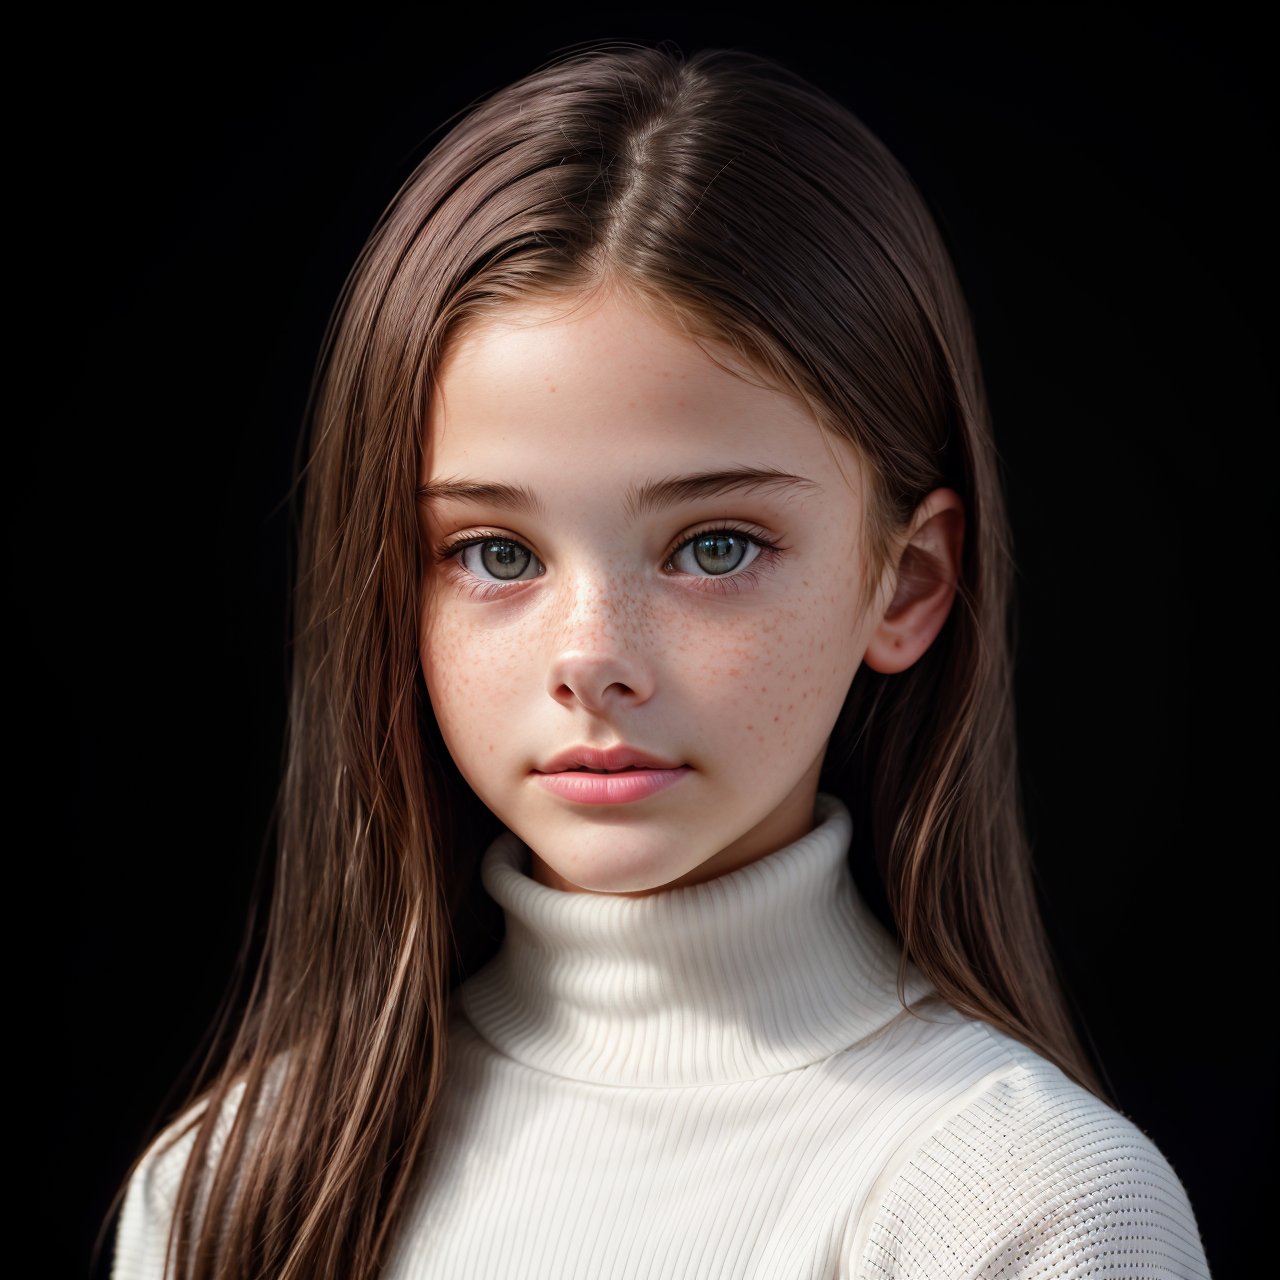 best quality, extra resolution, close up portrait of adorable (AIDA_LoRA_MeW2016:1.1) as cute [little] girl <lora:AIDA_LoRA_MeW2016:0.9> wearing (white turtle neck sweater:1.1), with glossy skin with visible pores and freckles, pretty face, naughty, playful, intimate, flirting, cinematic, studio photo, kkw-ph1, (colorful:1.1), (charcoal smoky black background:1.1)